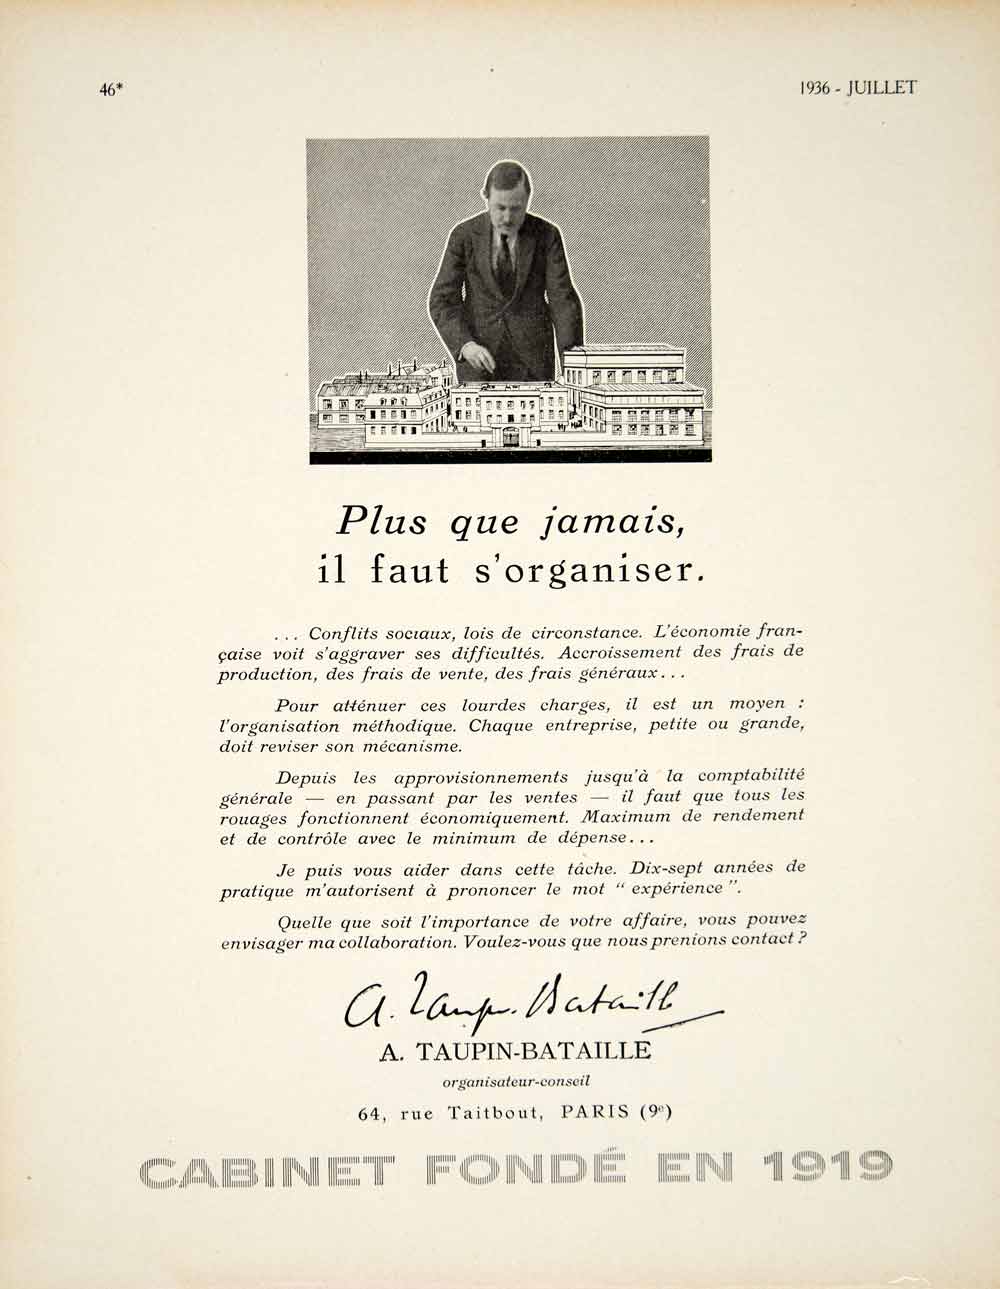 1936 Ad Vintage French A Taupin-Bataille Marketing Advertising Agency Paris VEN9